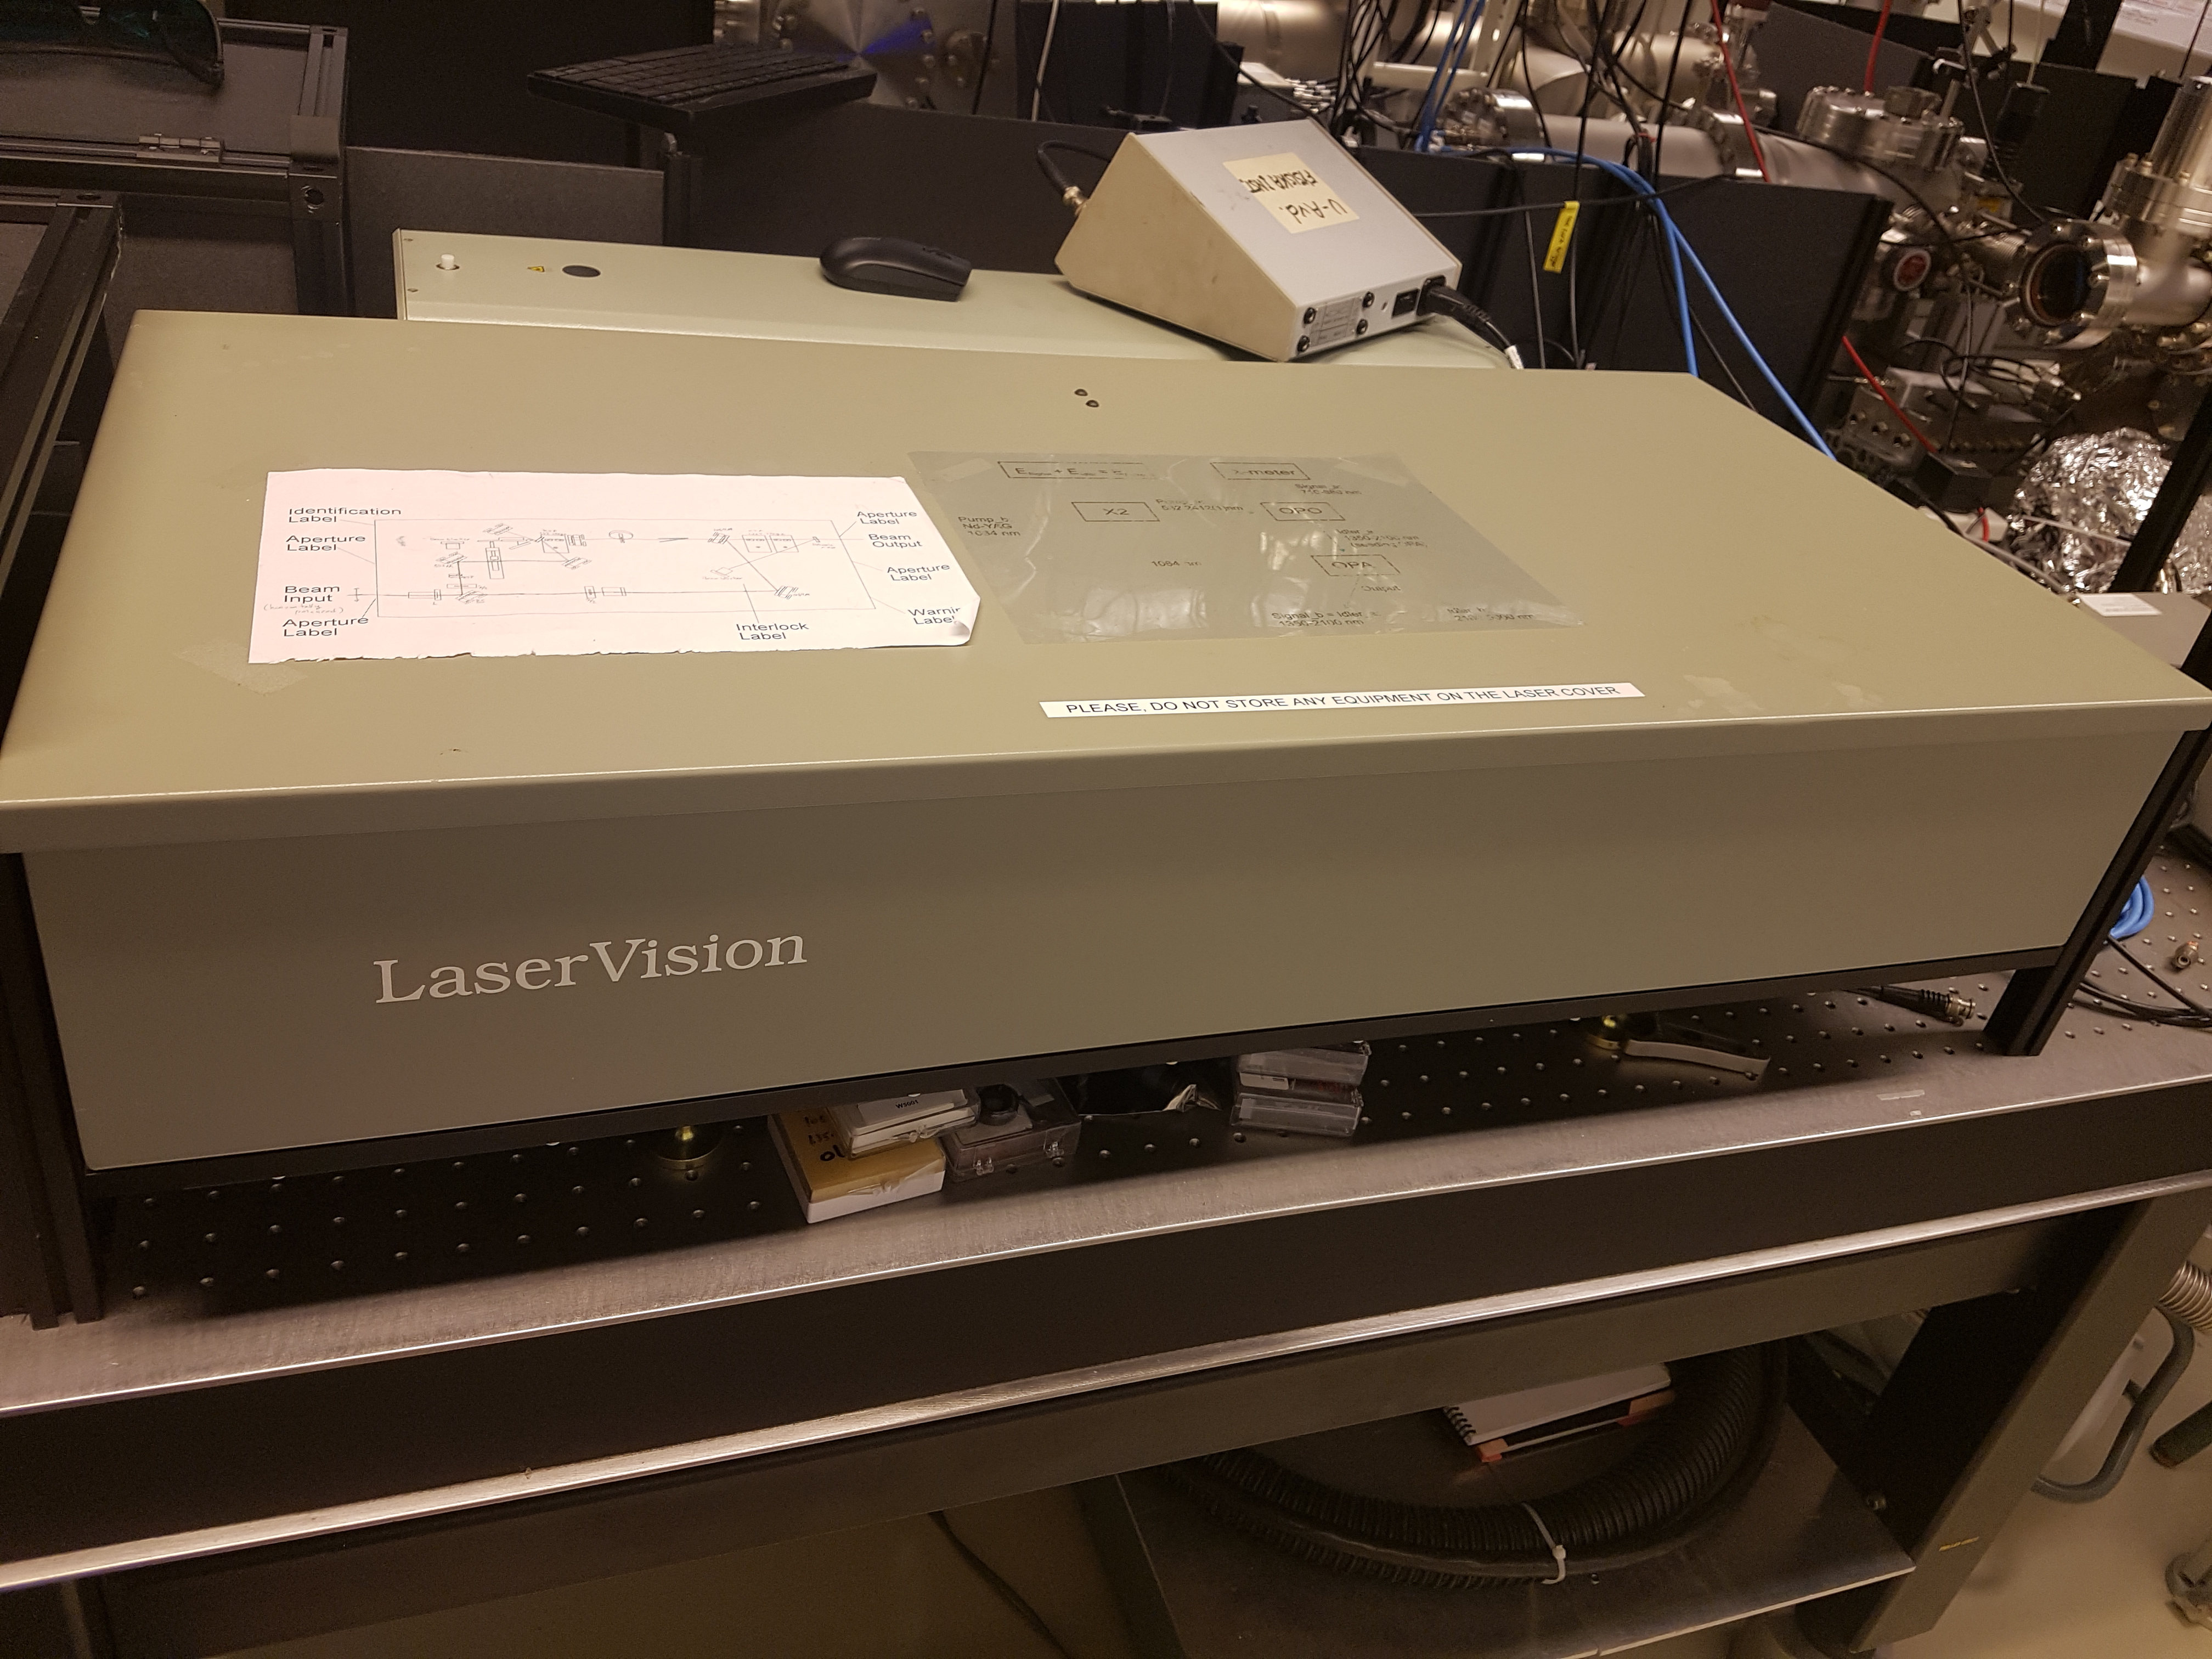  2 Laservision ns systemjpg